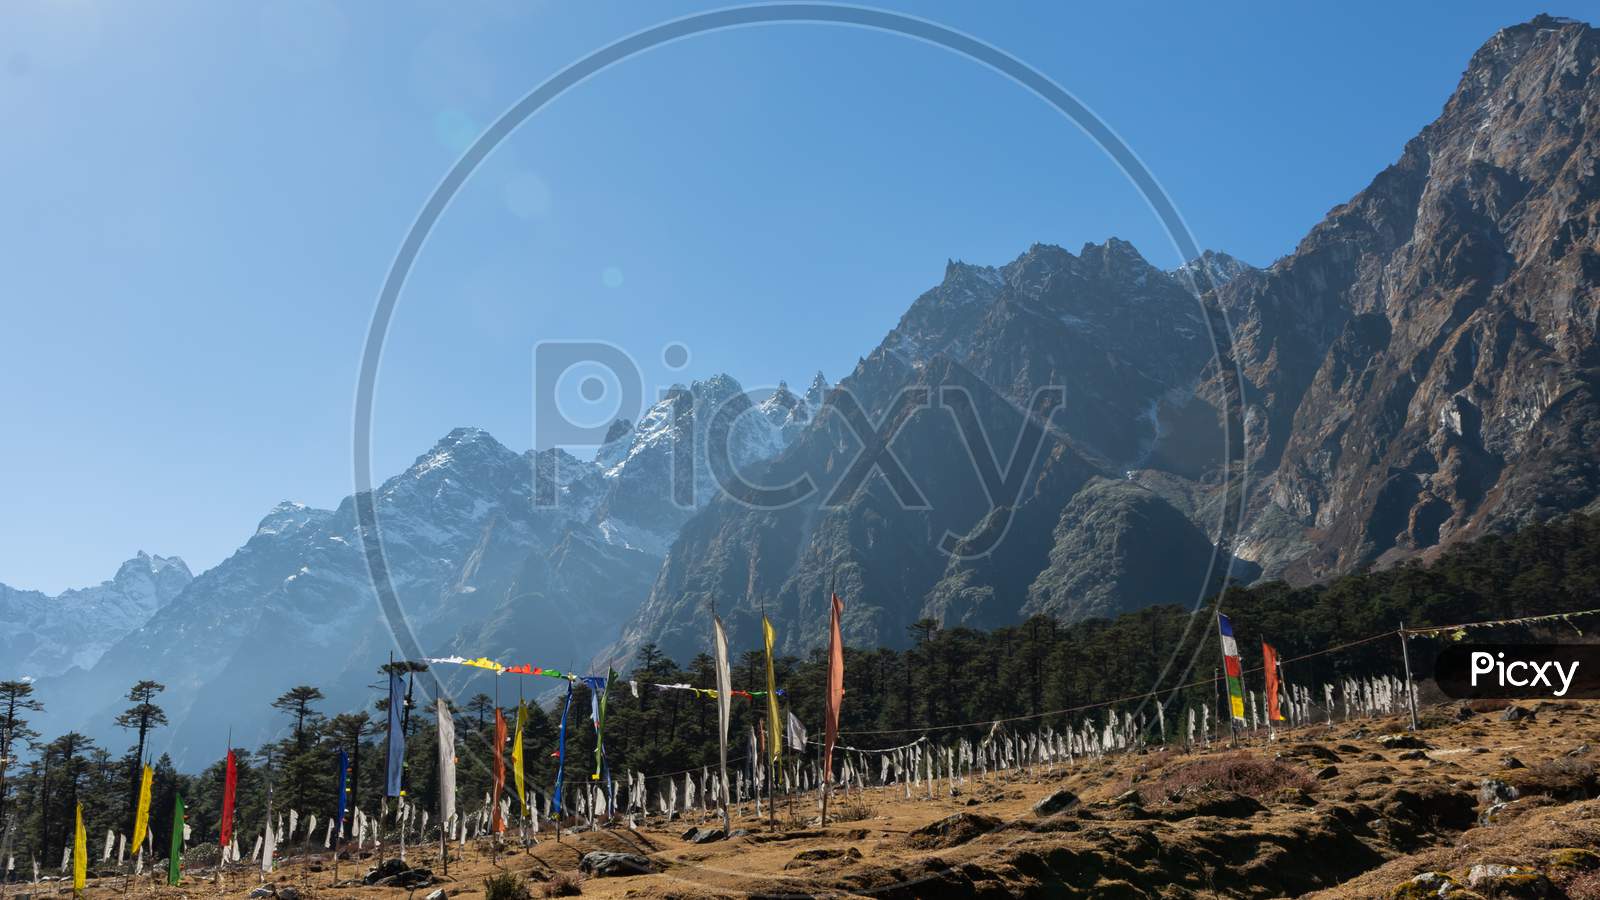 Tibetan prayer flags blowing with the wind